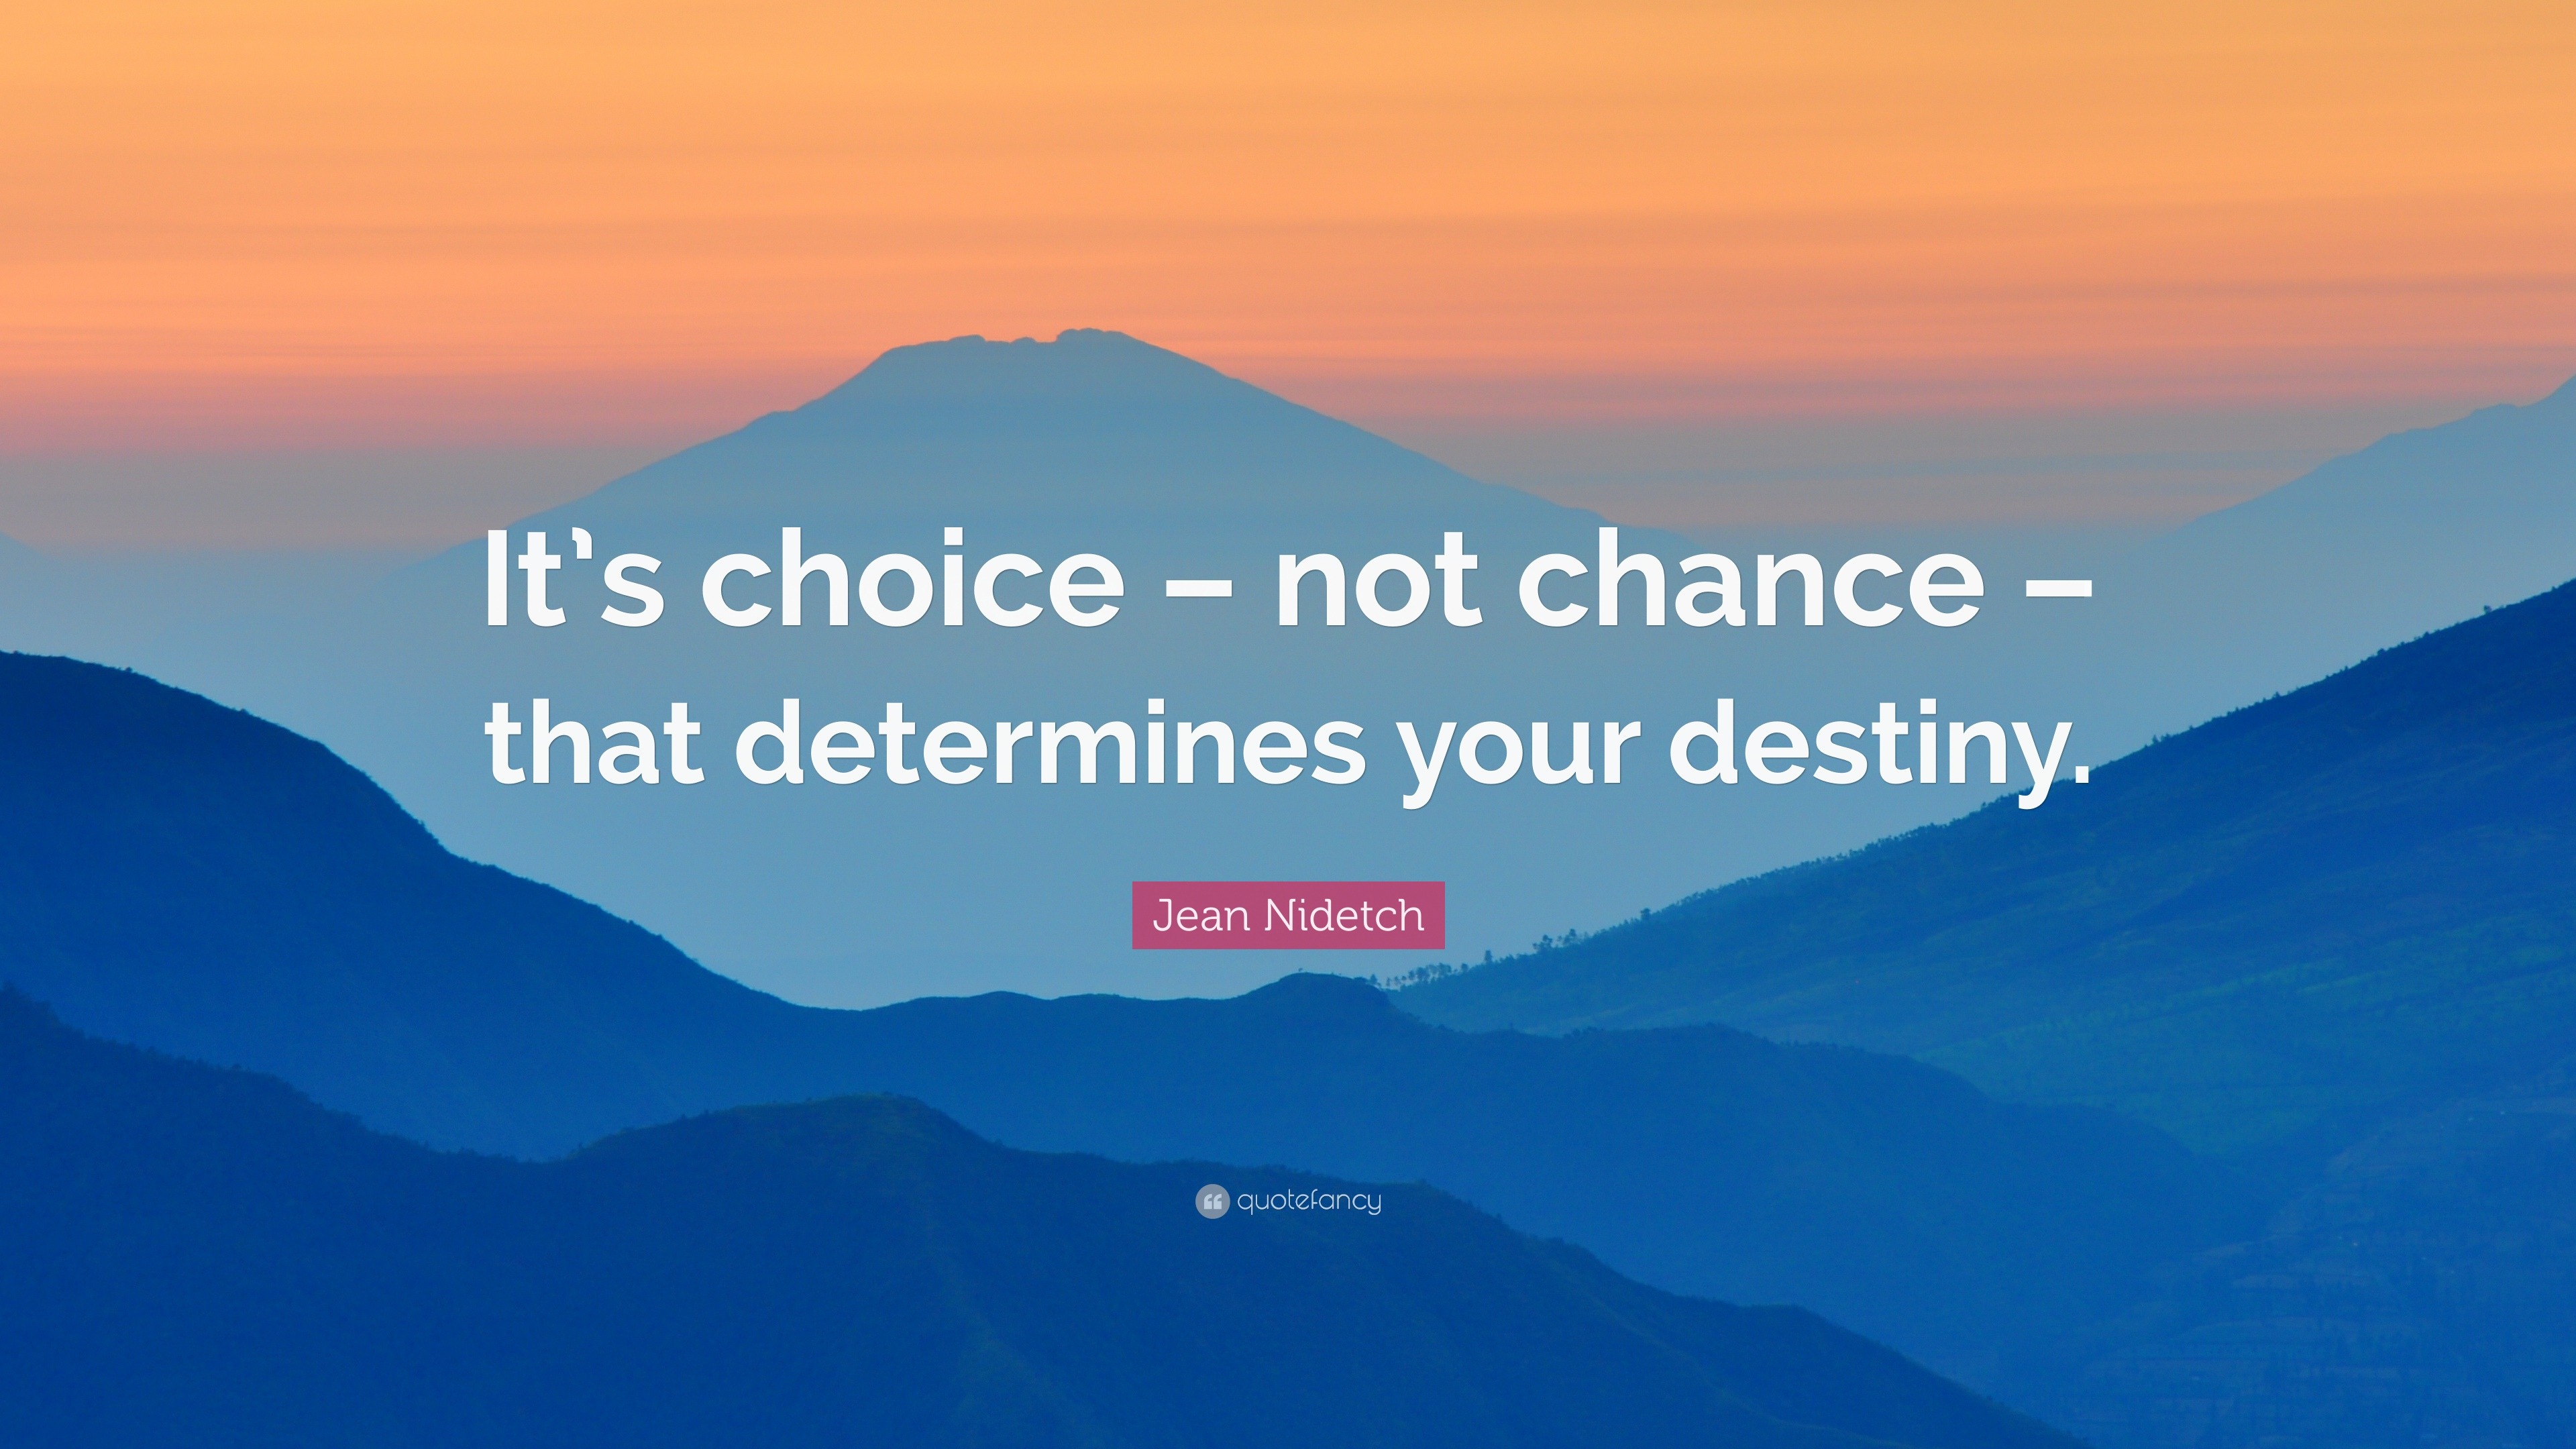 Jean Nidetch Quote: “It’s choice – not chance – that determines your